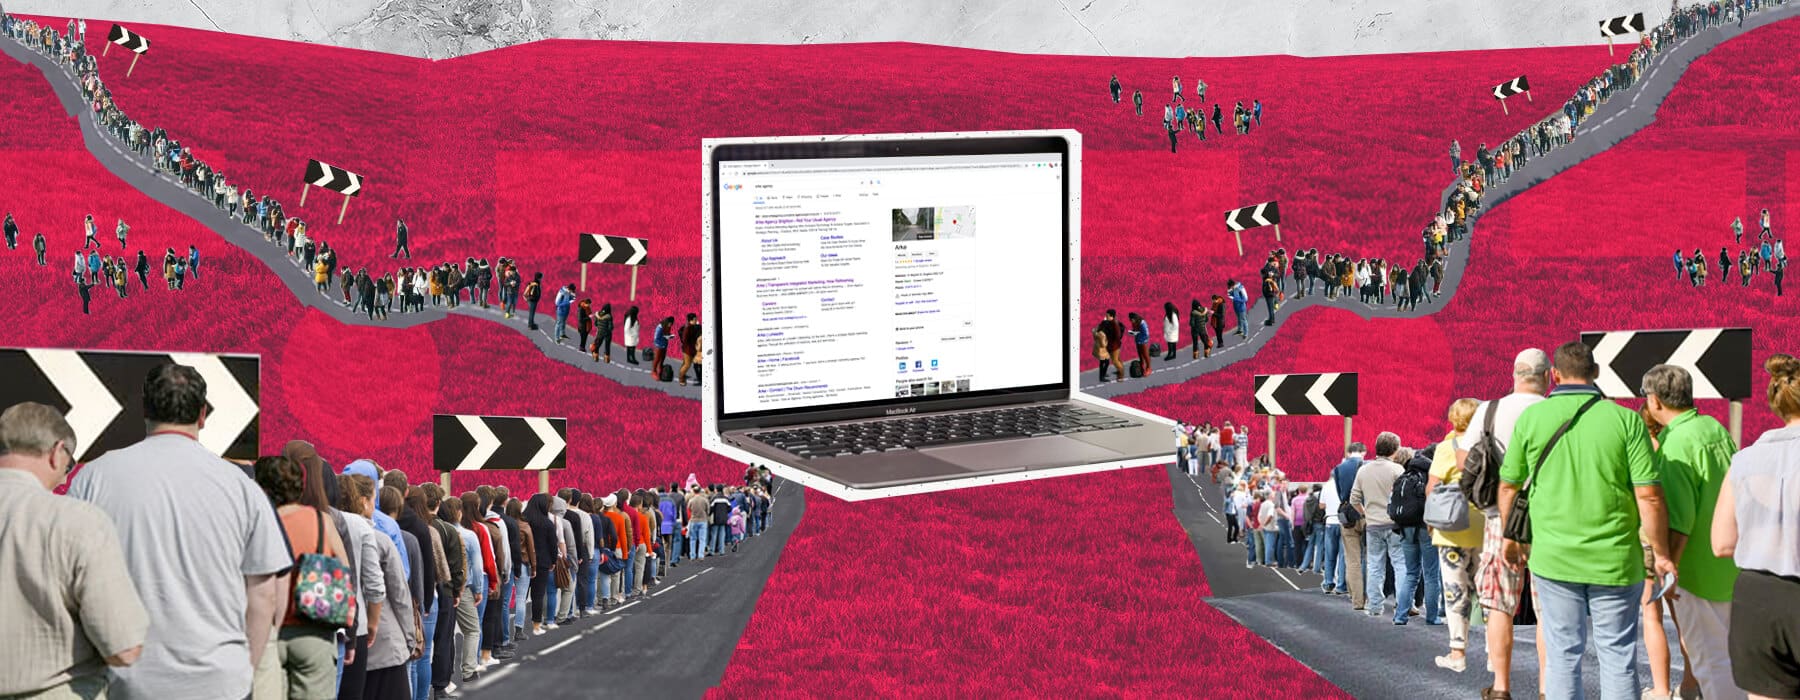 Laptop in the middle of a red field of grass